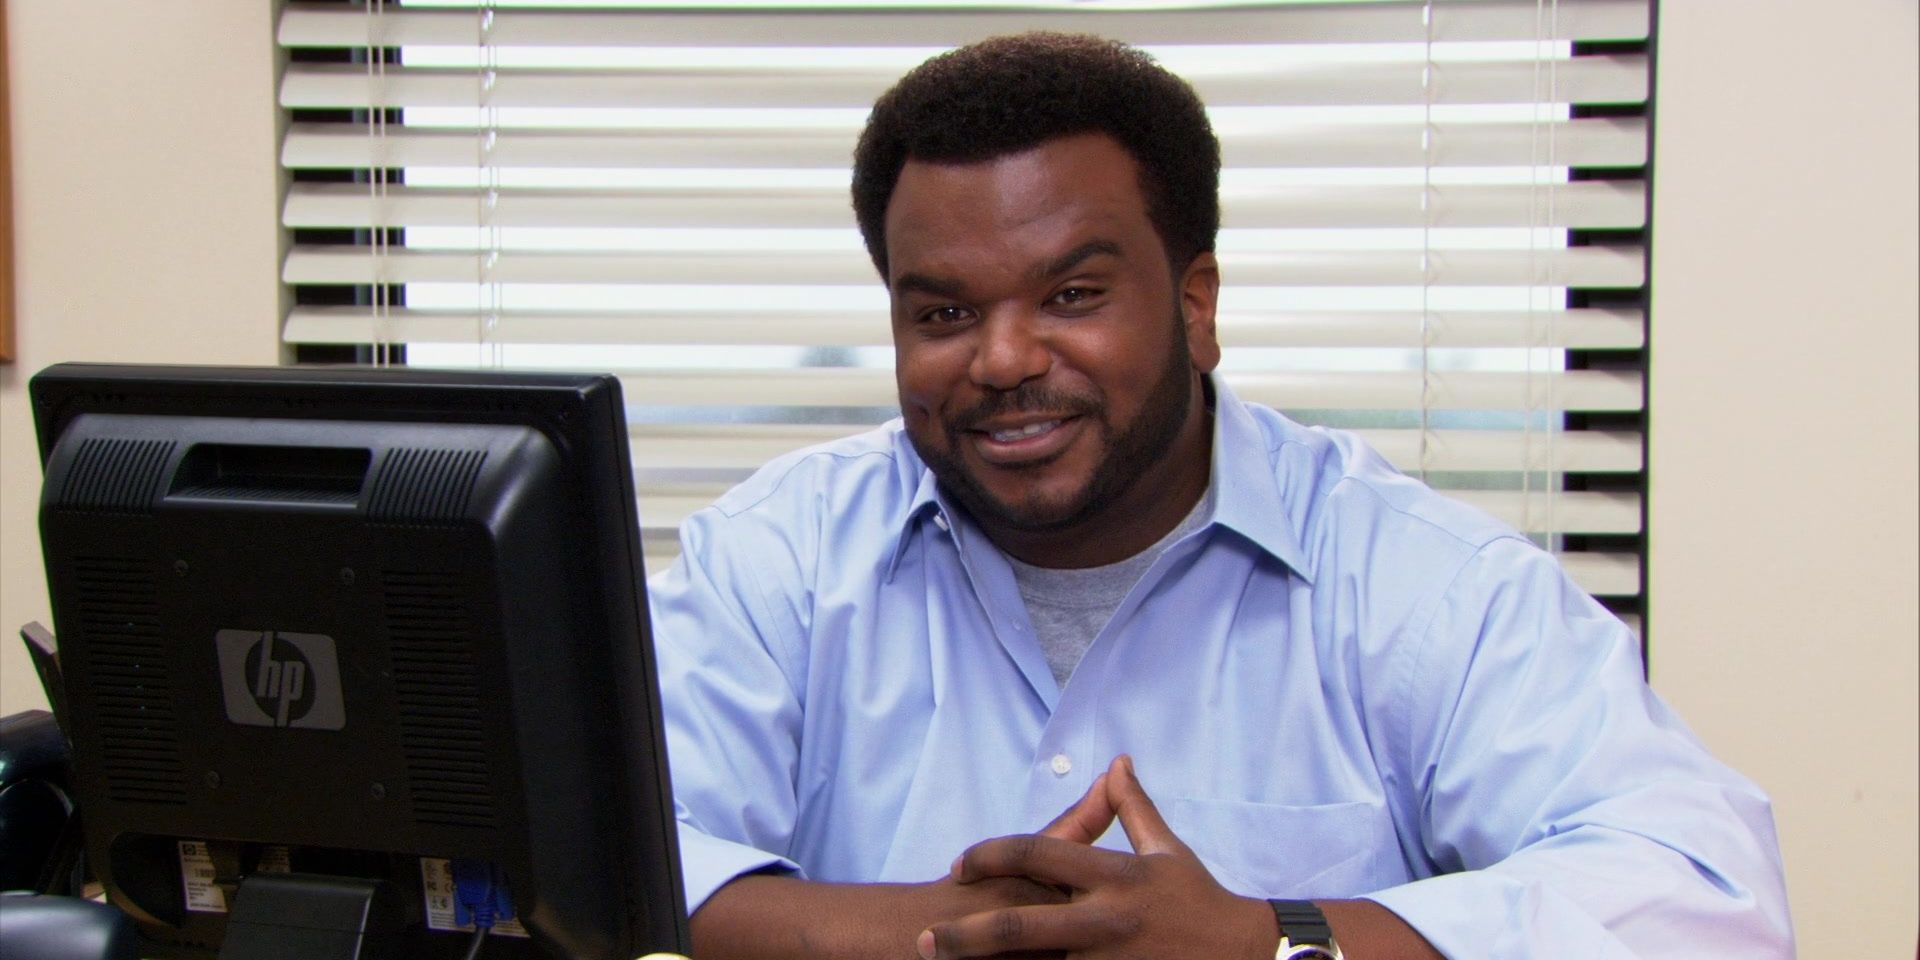 Darryl sitting behind a desk, talking to the camera on The Office